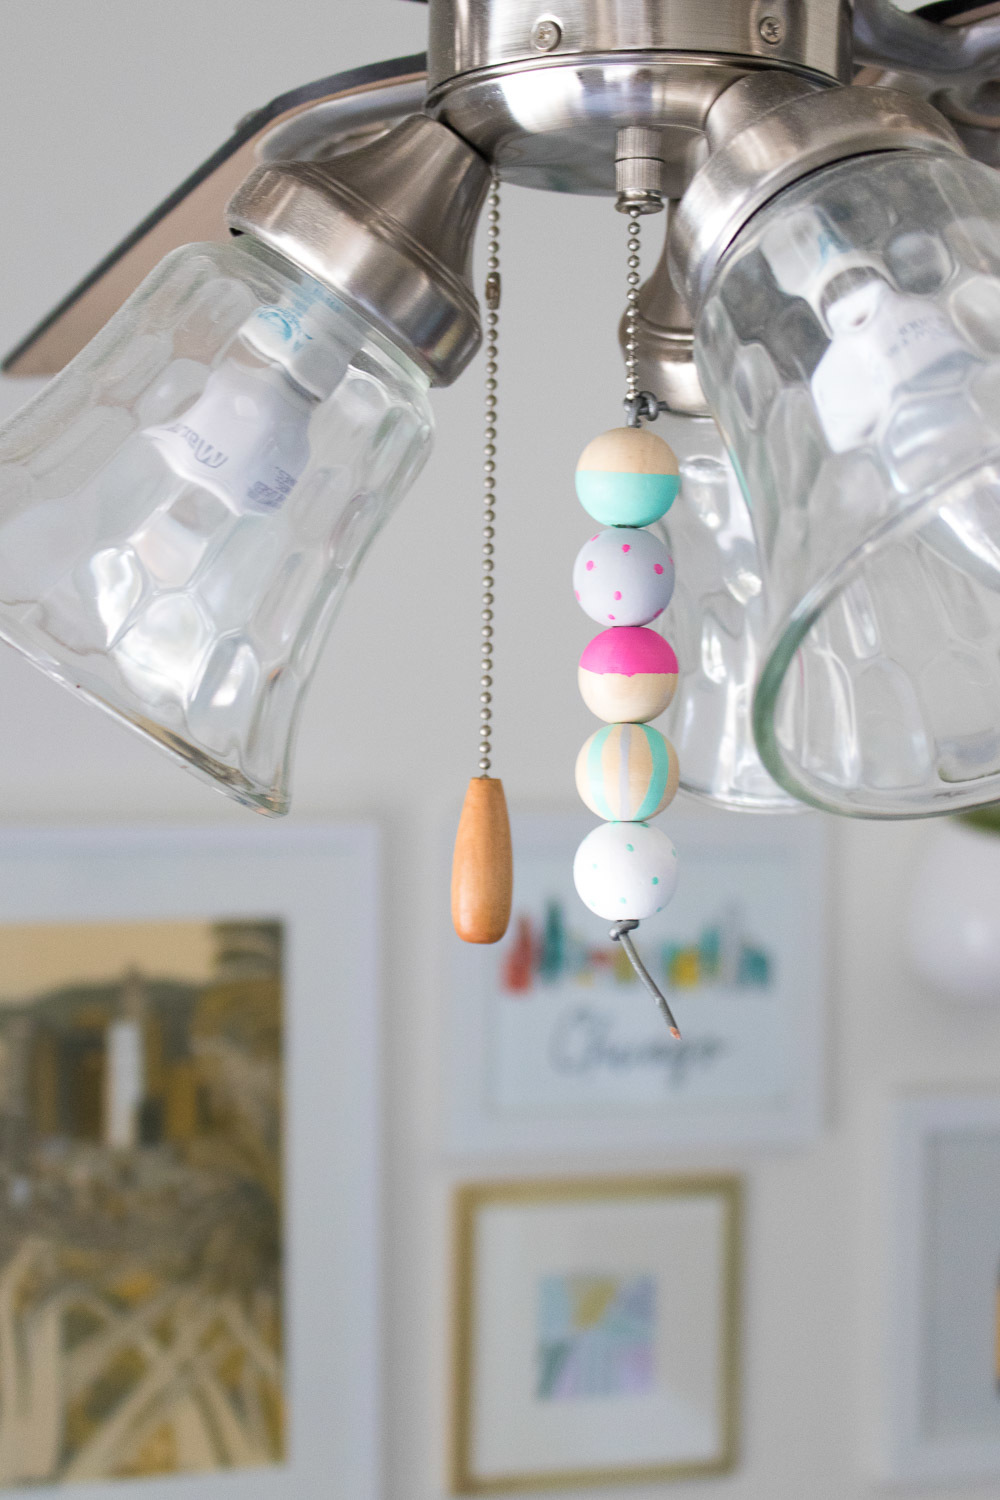 Balls are hanging from a cord of a ceiling light fixture.